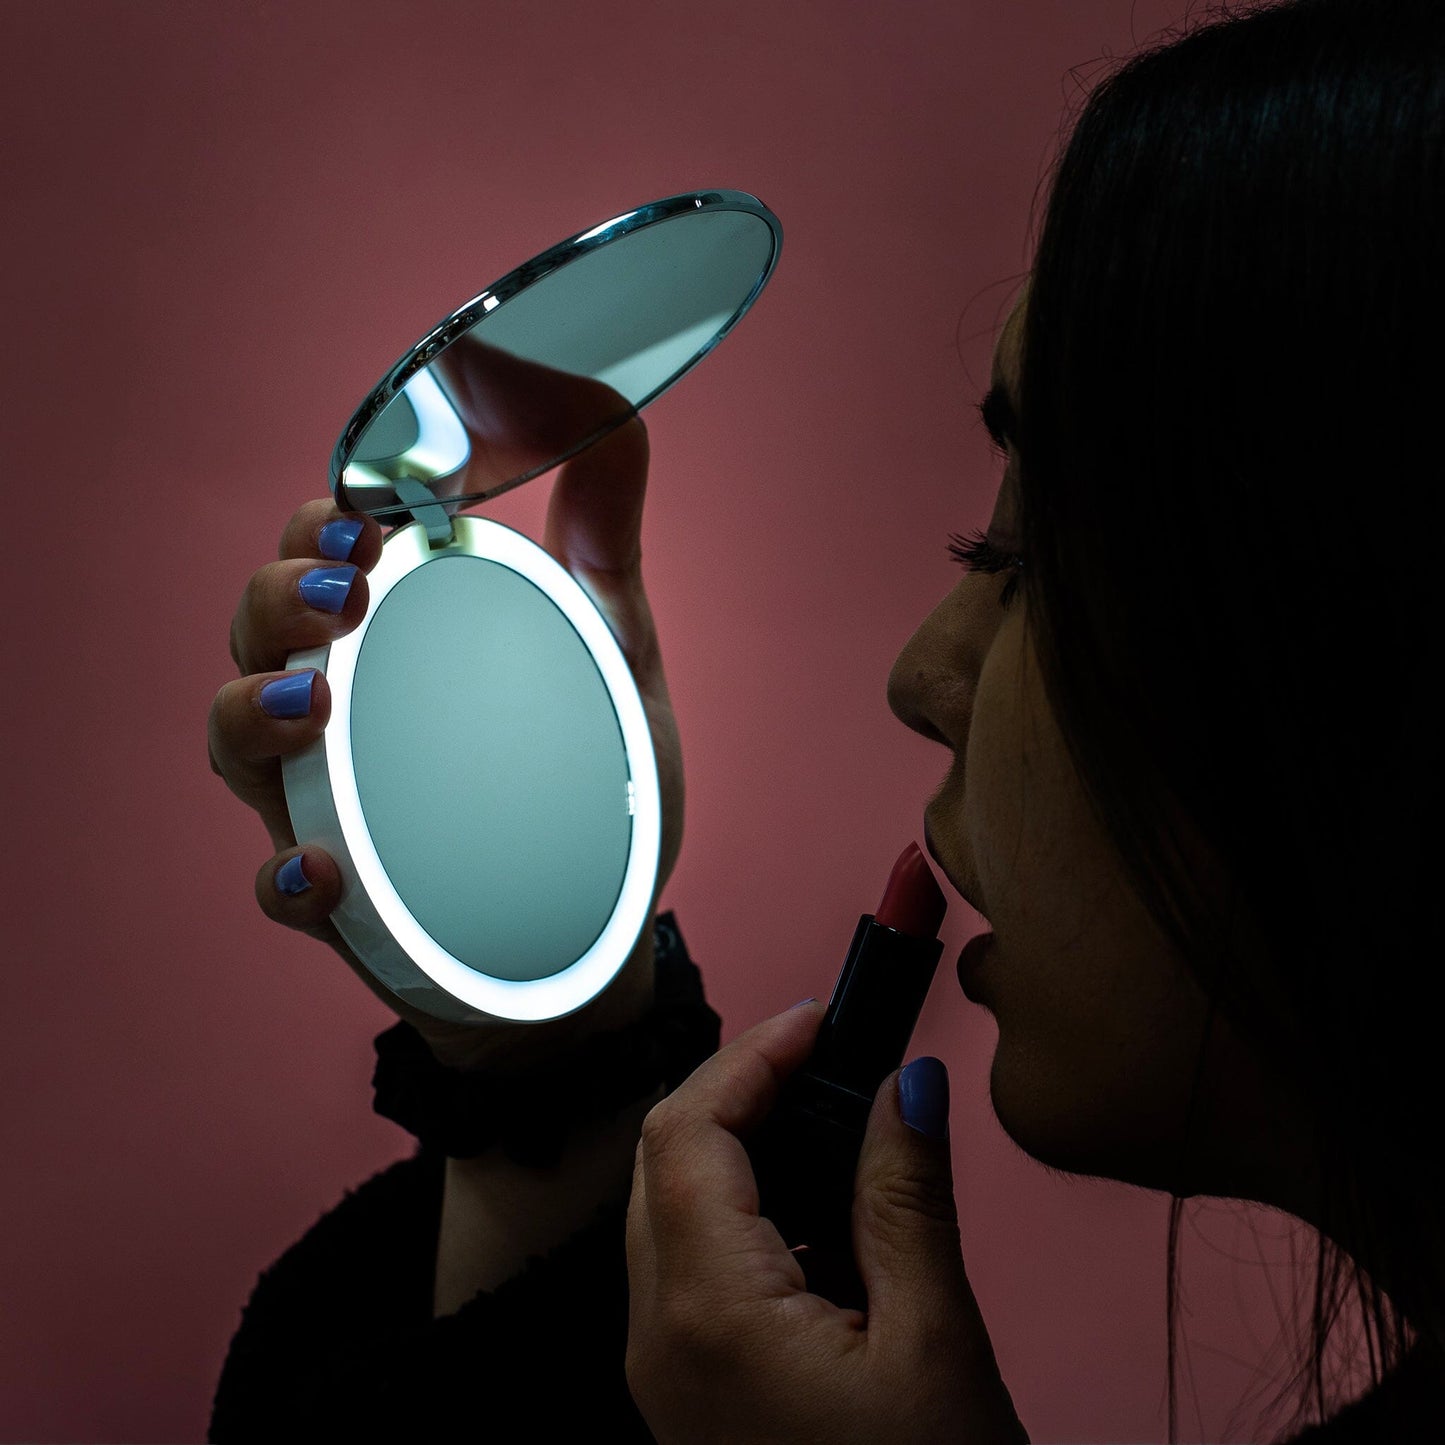 STYLPRO Flip 'n' Charge Power Bank LED Mirror